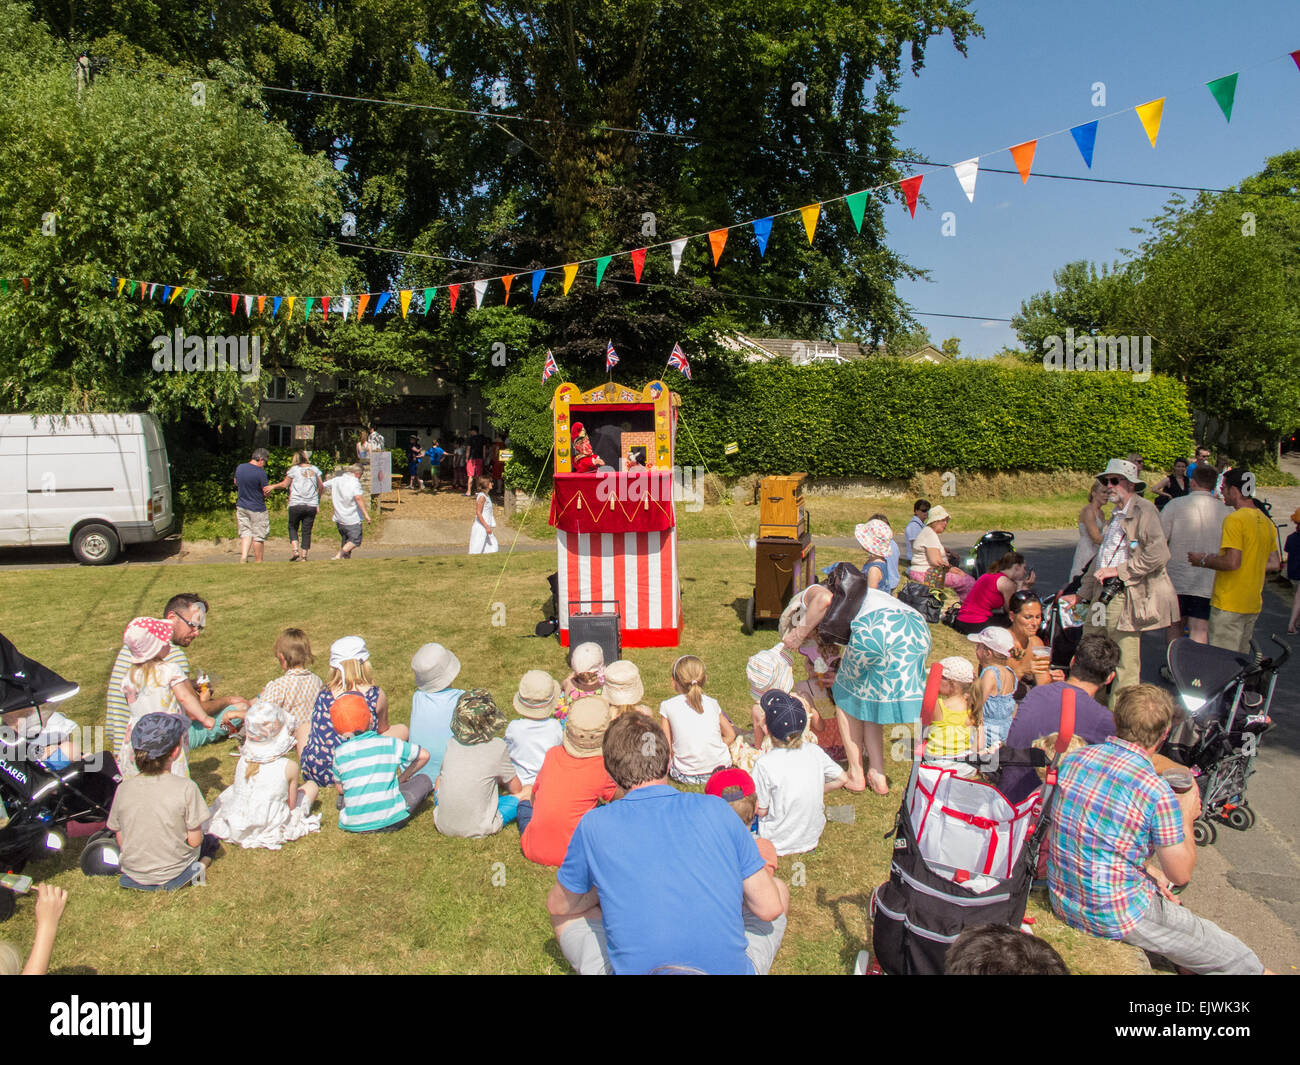 Children watching a traditional British Punch and Judy show Stock Photo